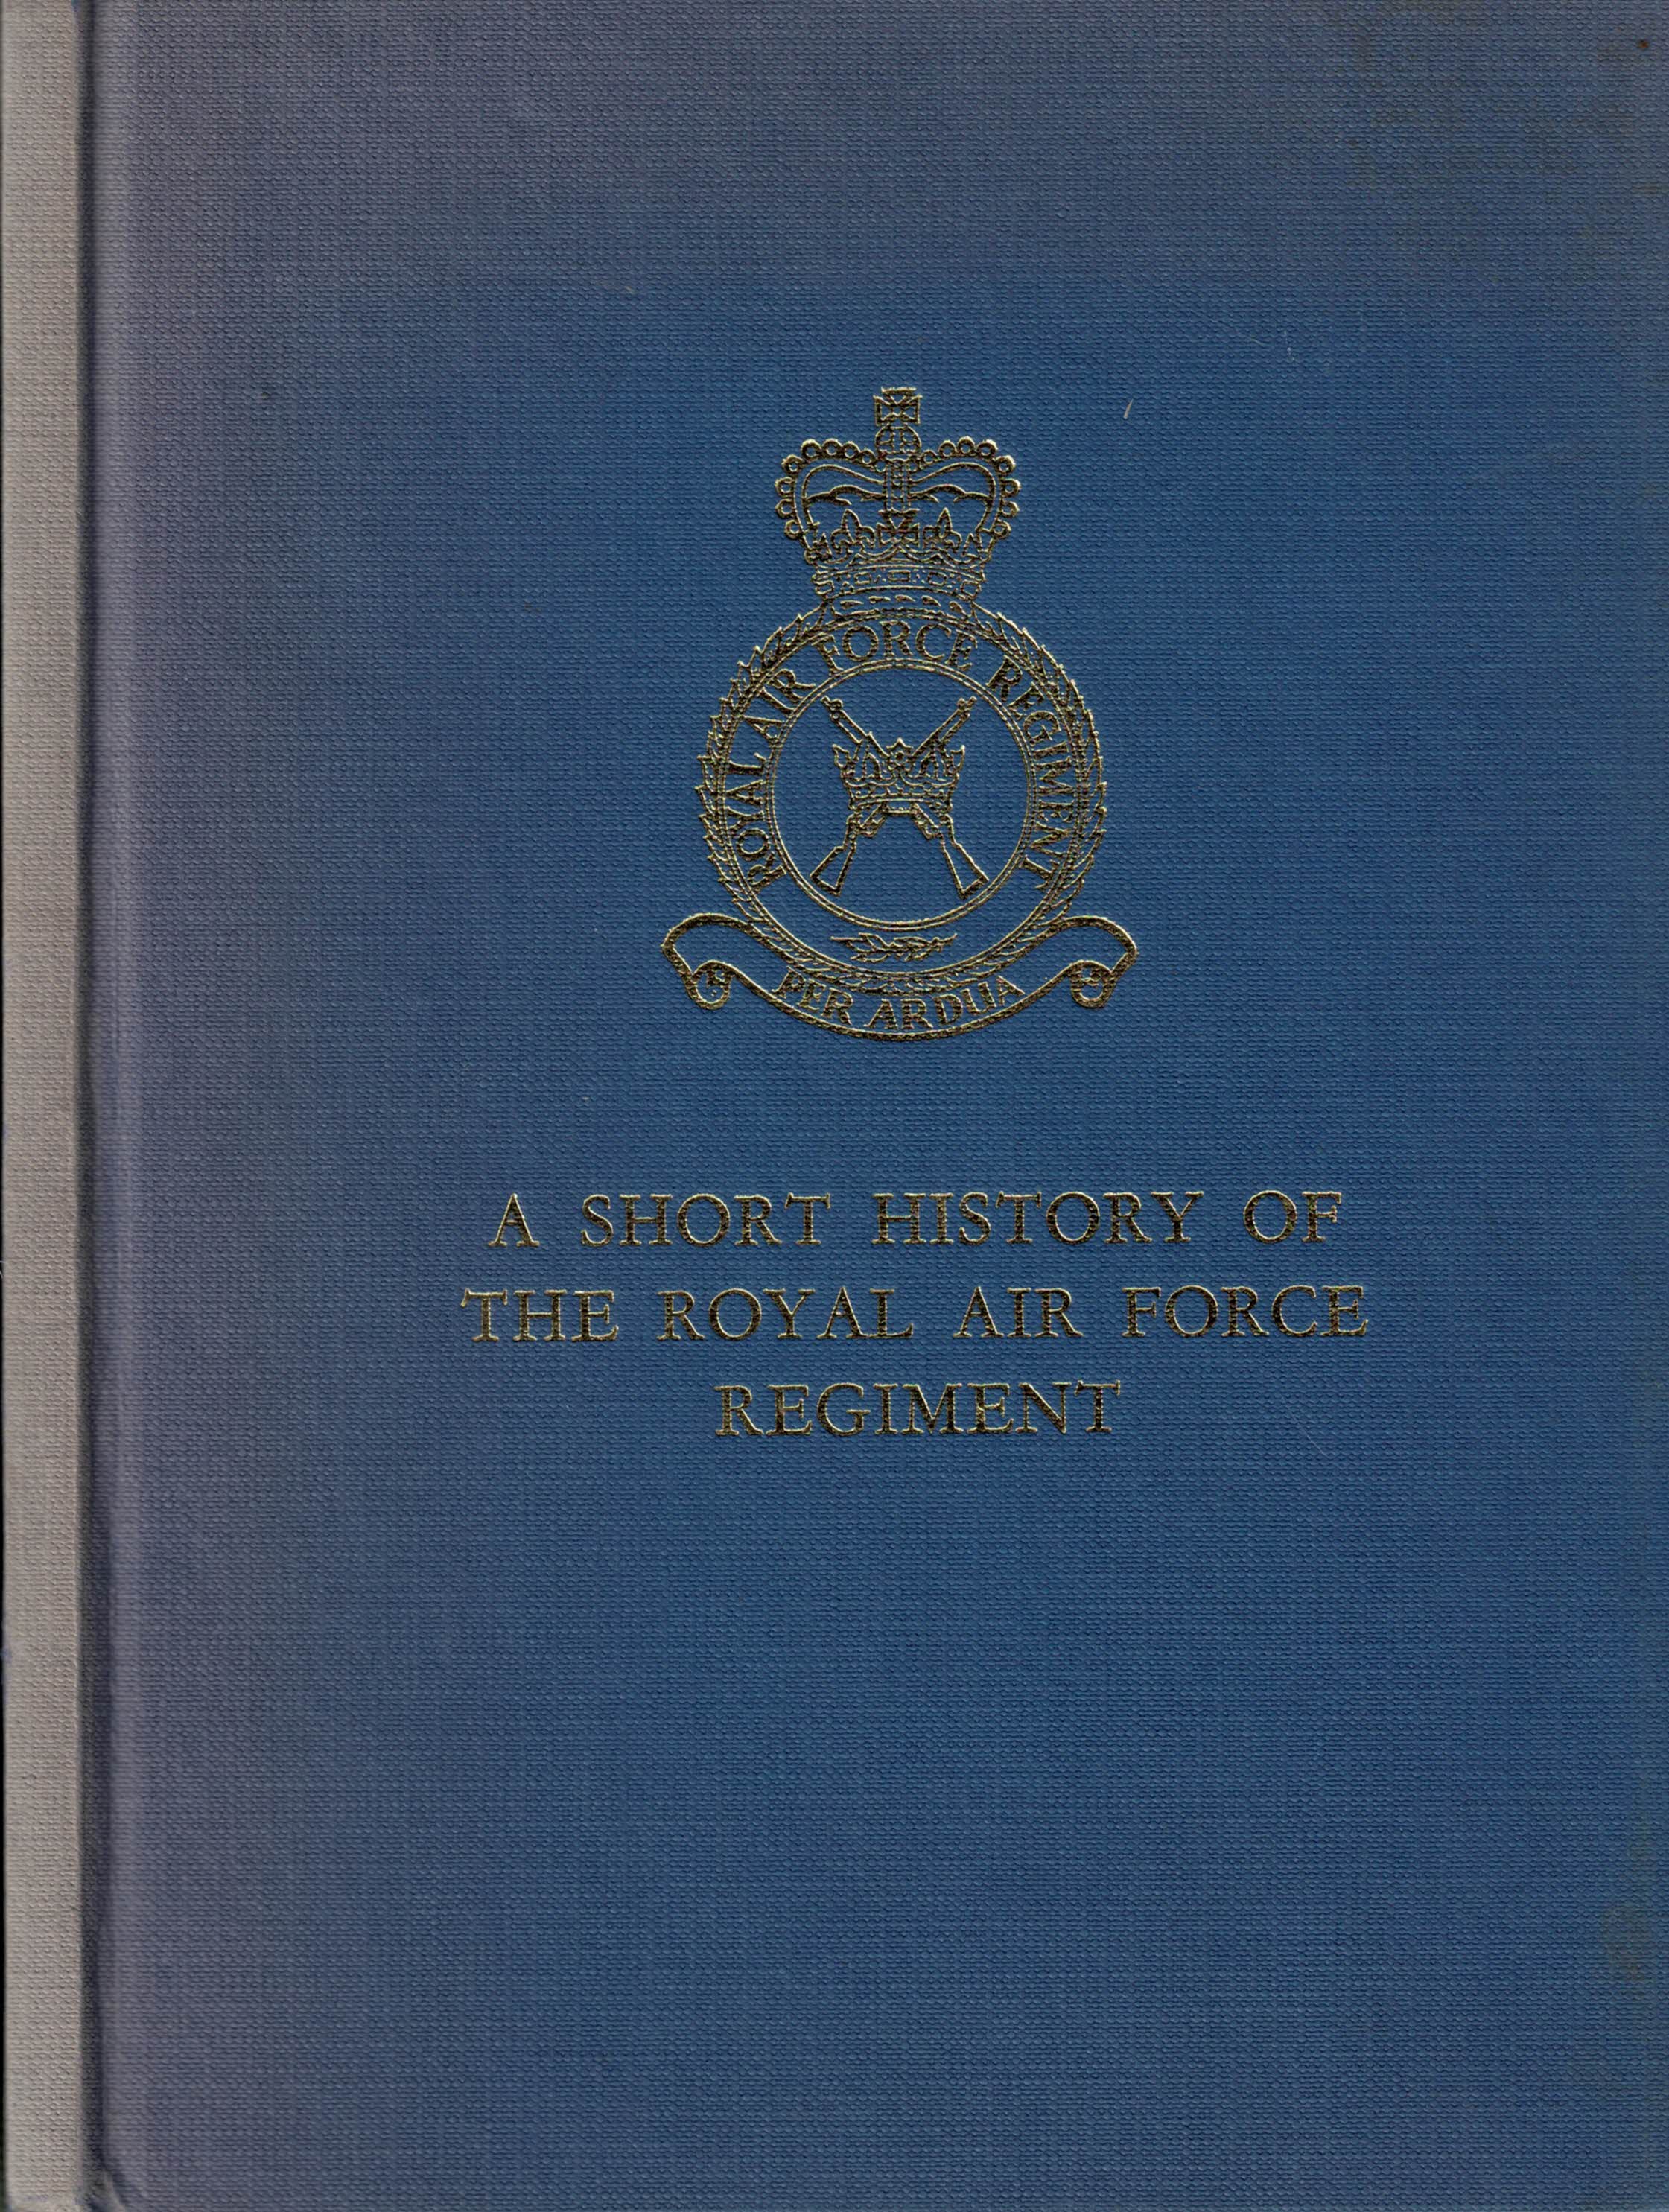 A Short History of the Royal Air Force Regiment